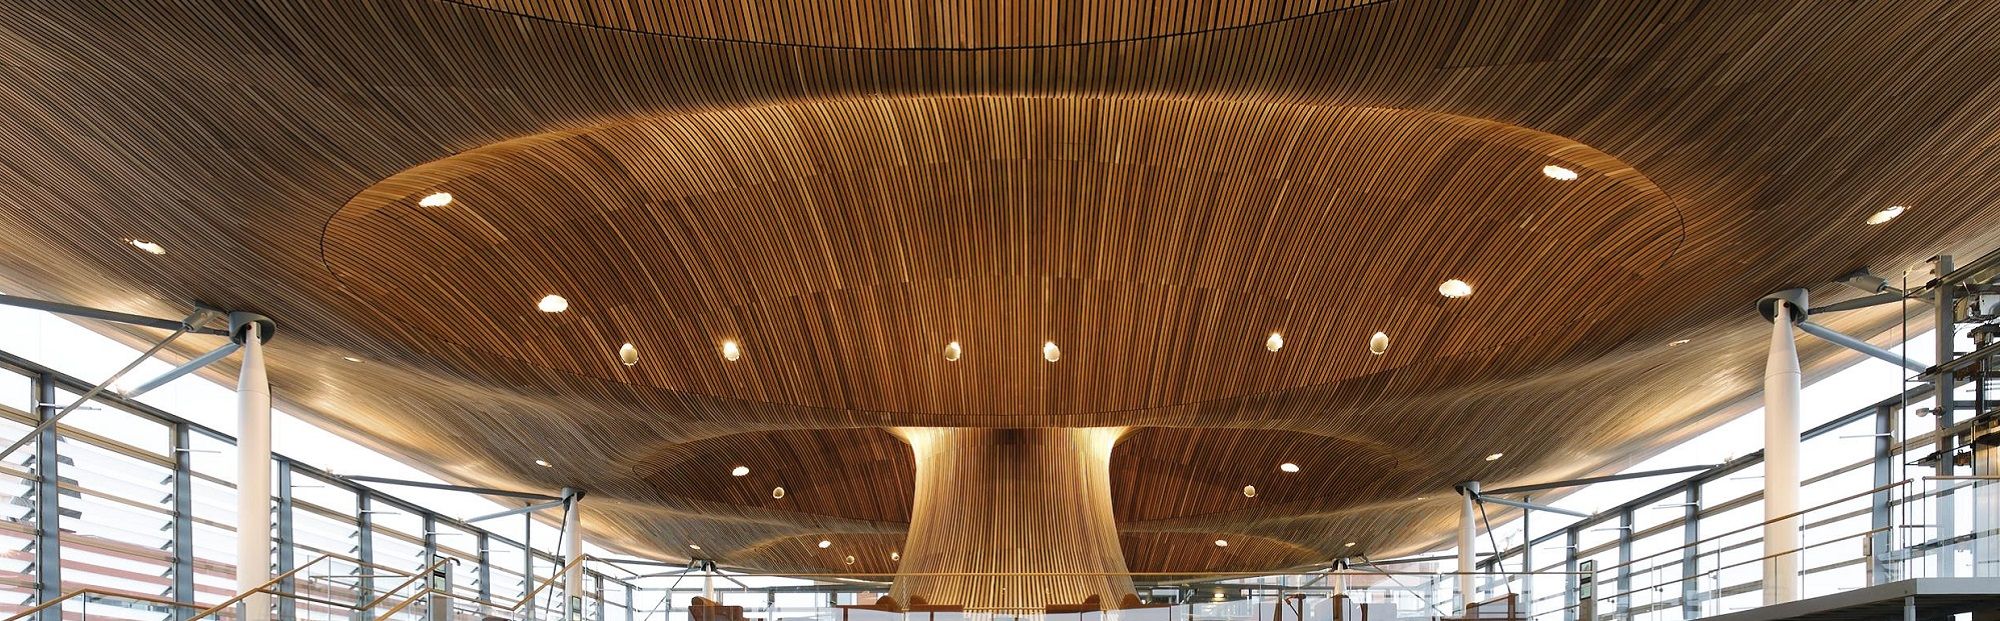 View of a BCL Acoustic Timber Ceiling using Western Red Cedar installed at The Senedd Welsh Assembly Building in Cardiff 